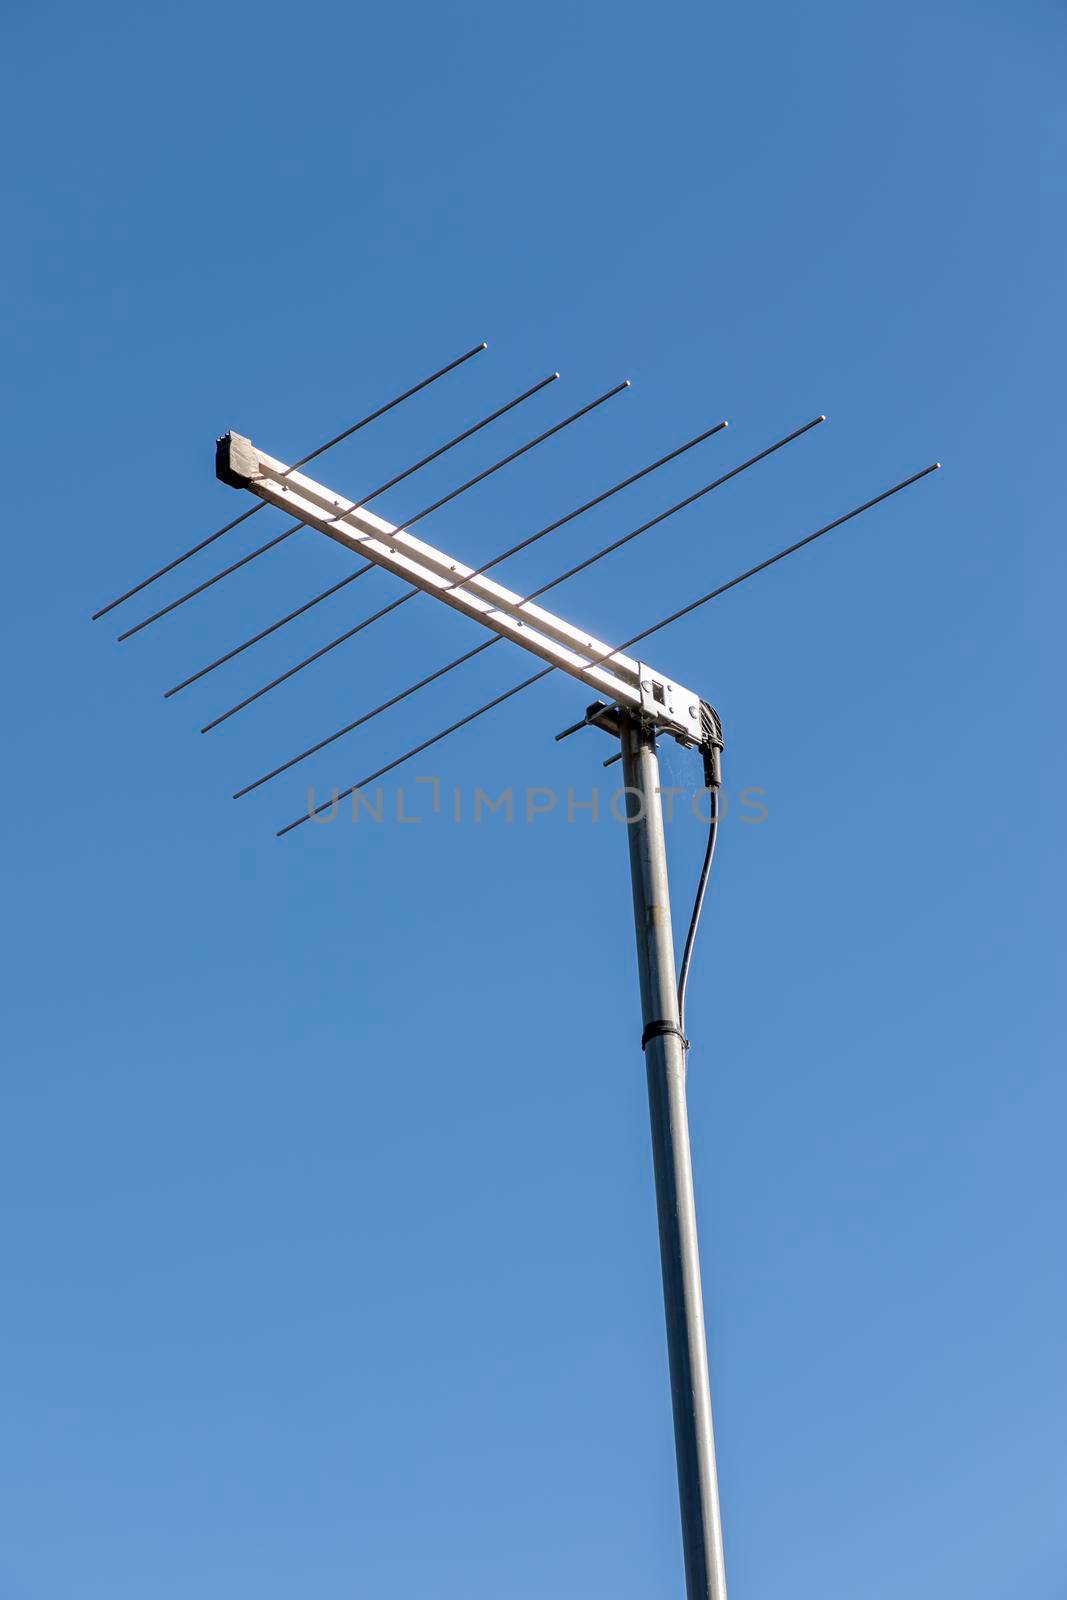 A metal television antenna on a a house roof against a blue sky background